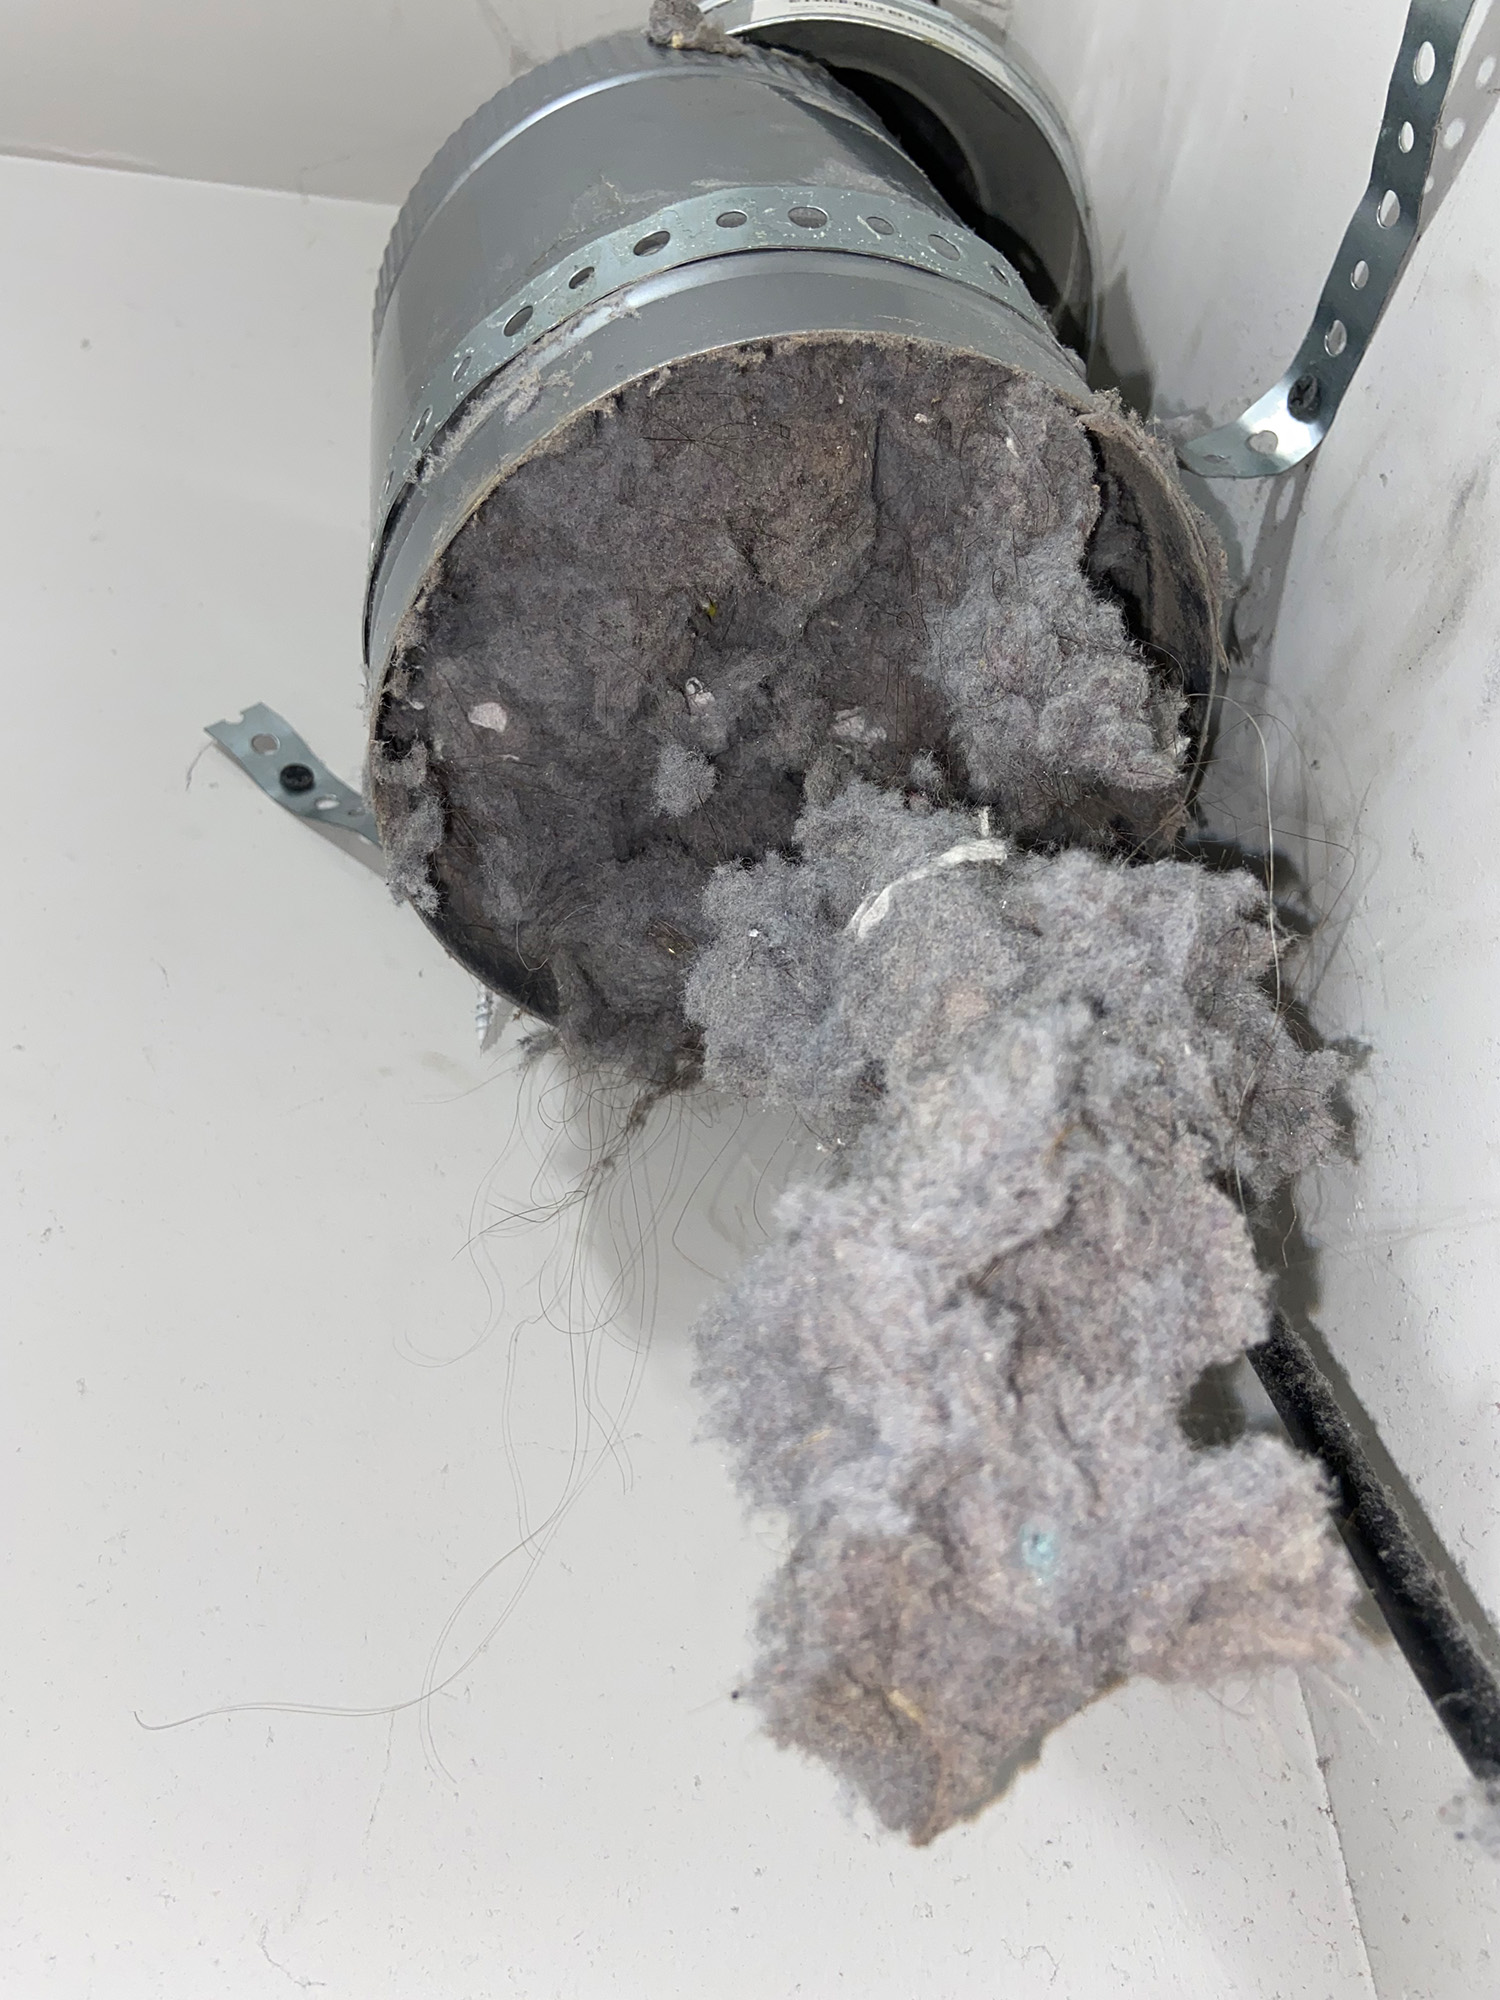 Frequency of Dryer Vent Cleaning